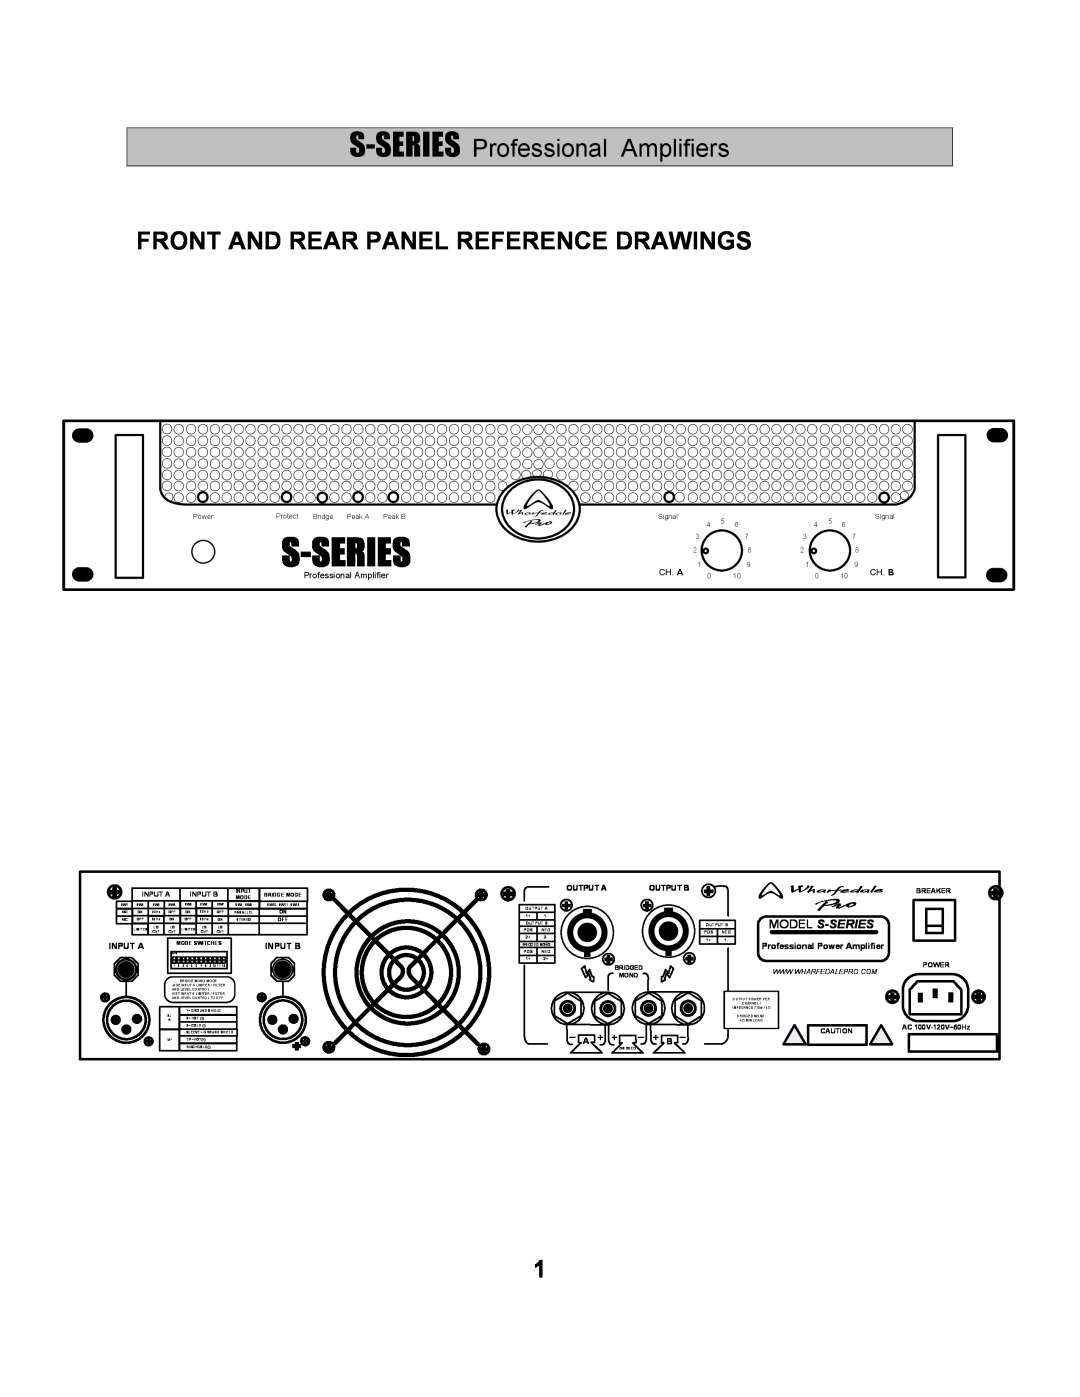 Wharfedale S-1500 Front And Rear Panel Reference Drawings, S-SERIES Professional Amplifiers, Model S-Series, A + +, Ch. A 